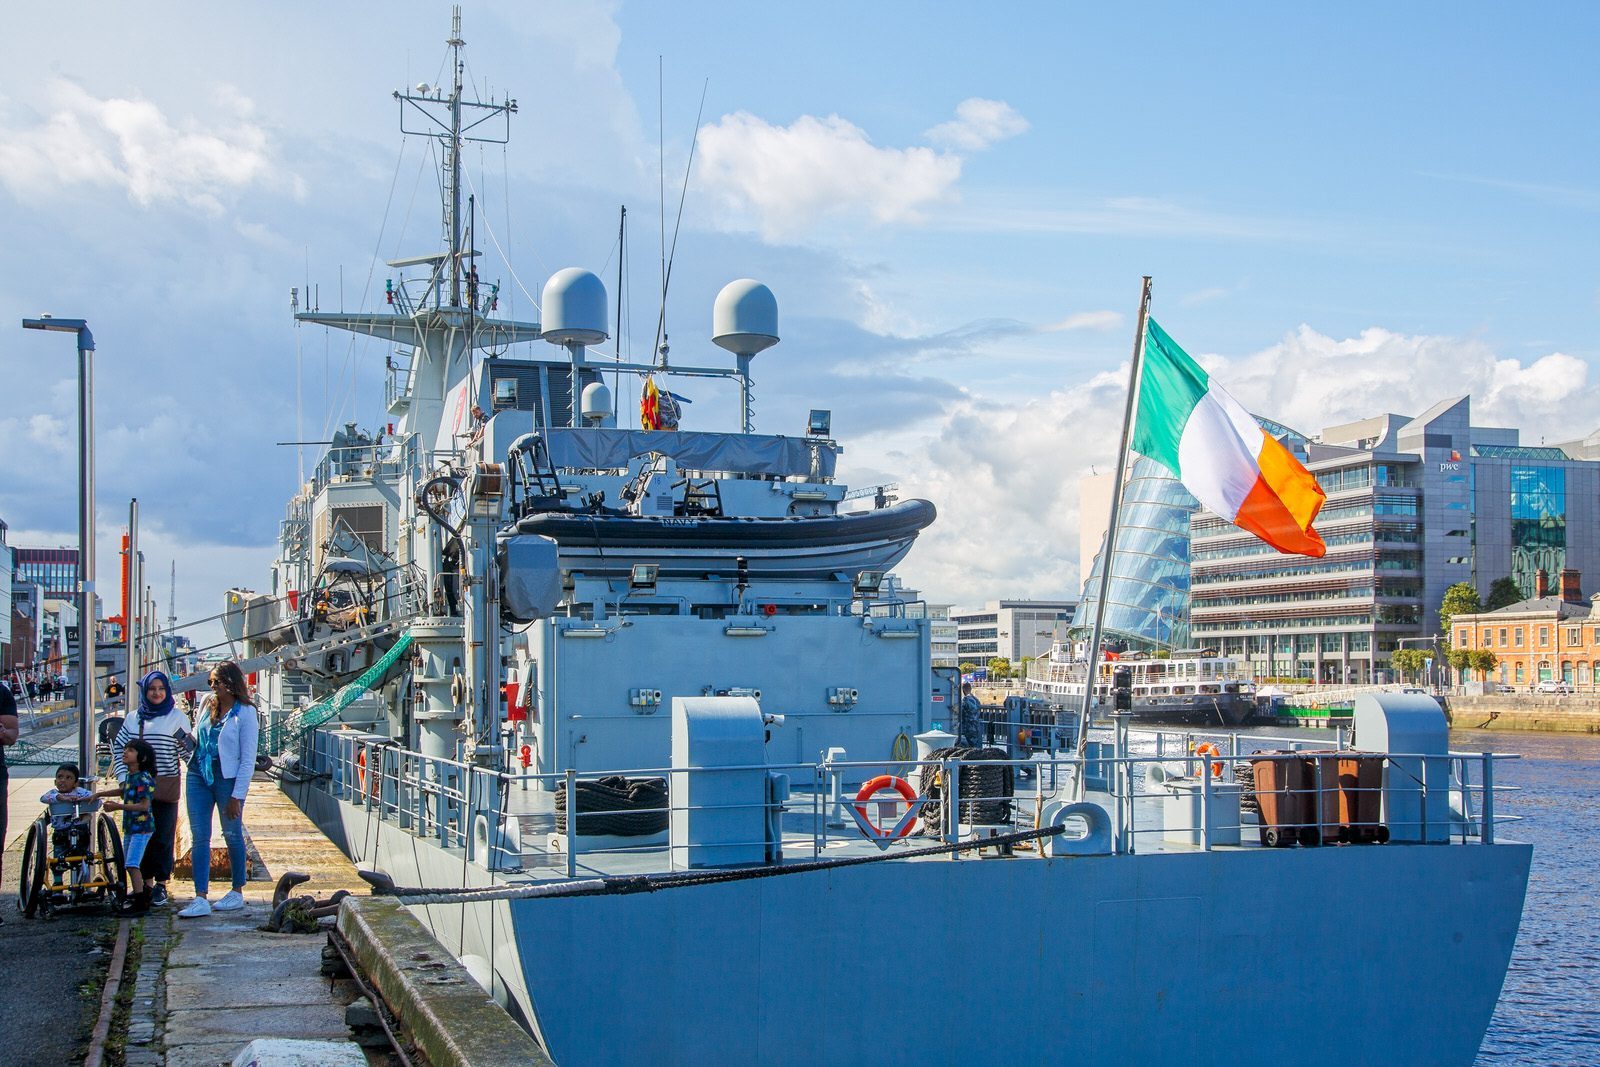 THE P61 IS AN IRISH NAVY VESSEL [I WAS HOPING TO PHOTOGRAPH THE USS MESA VERDE] 011